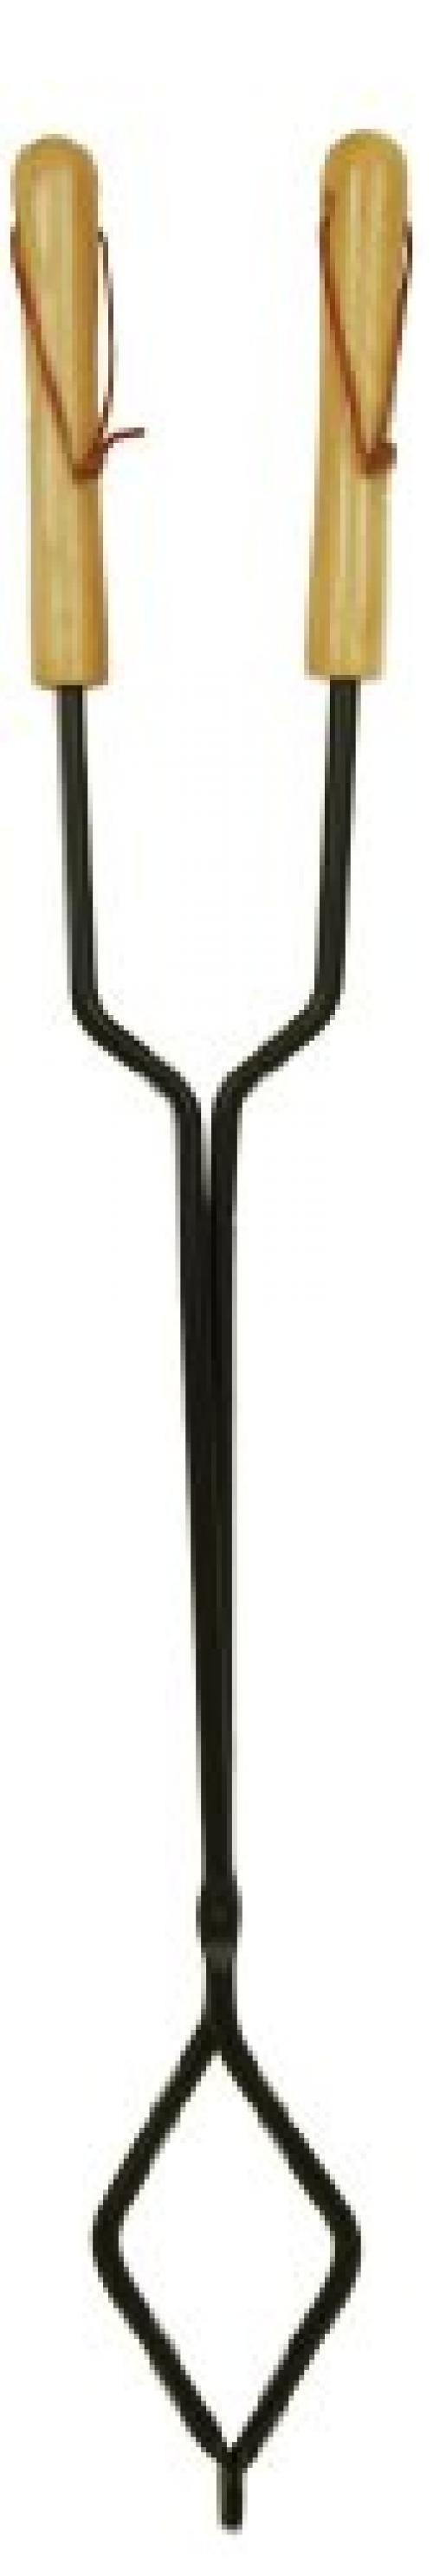 Campfire Fire Place Tender Tongs  Extra Long 36-inch by Camp